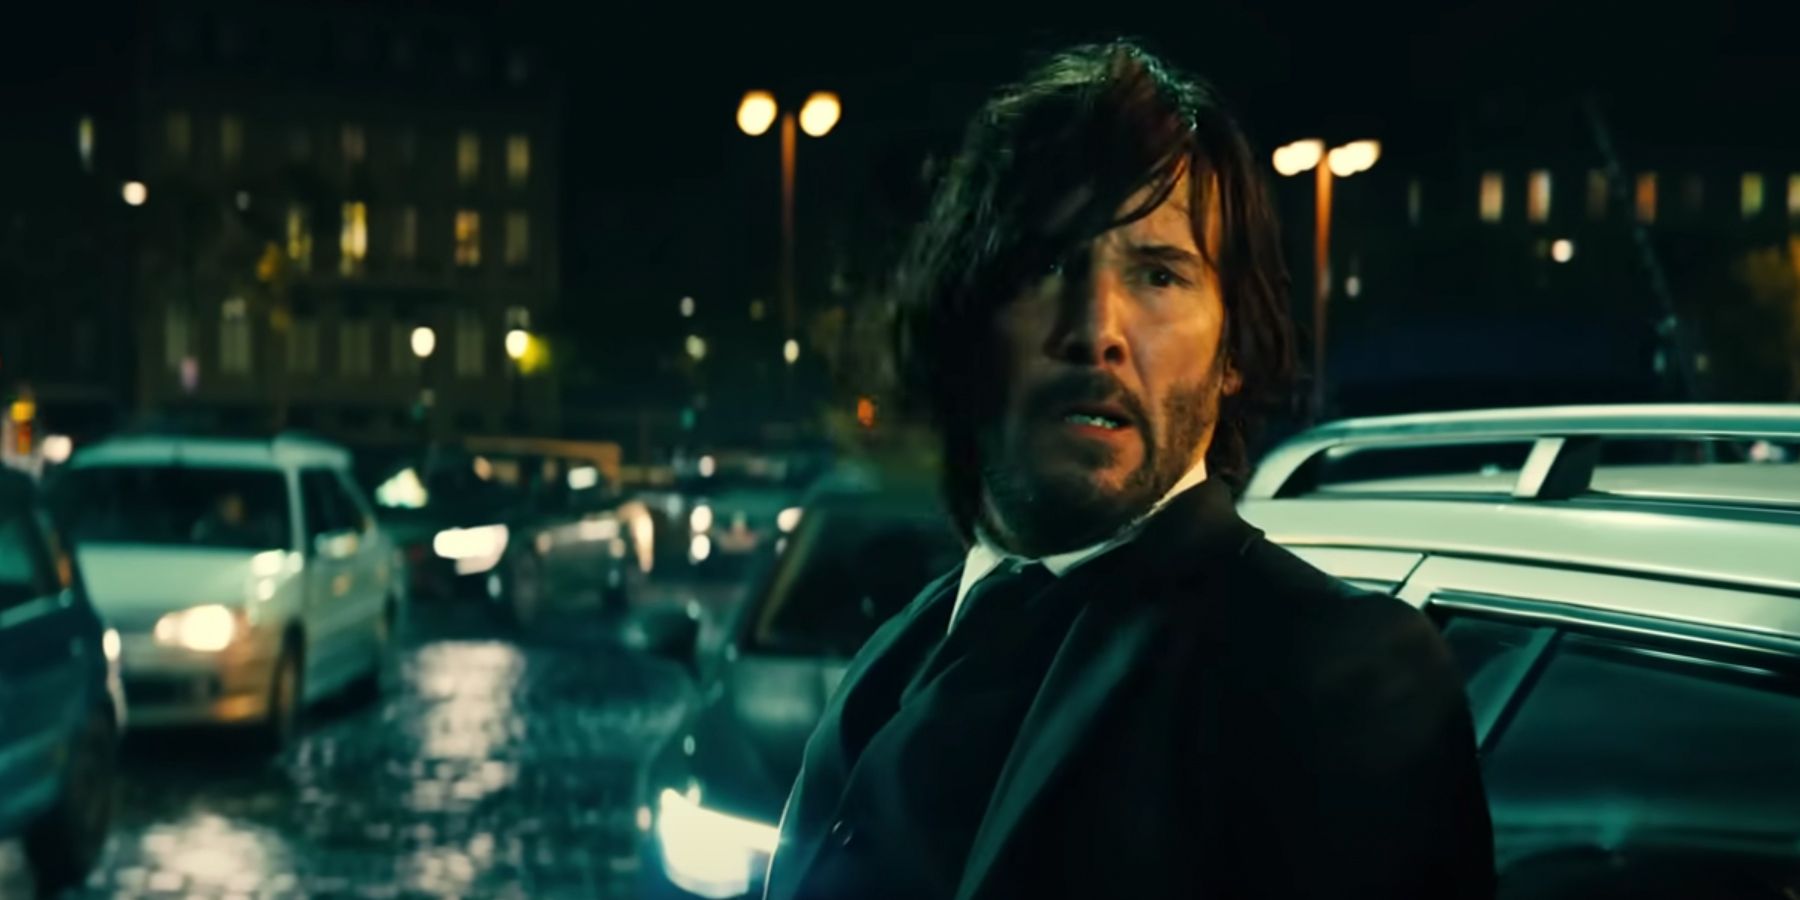 Keanu Reeves Caused An On-Set Injury While Filming A John Wick Movie